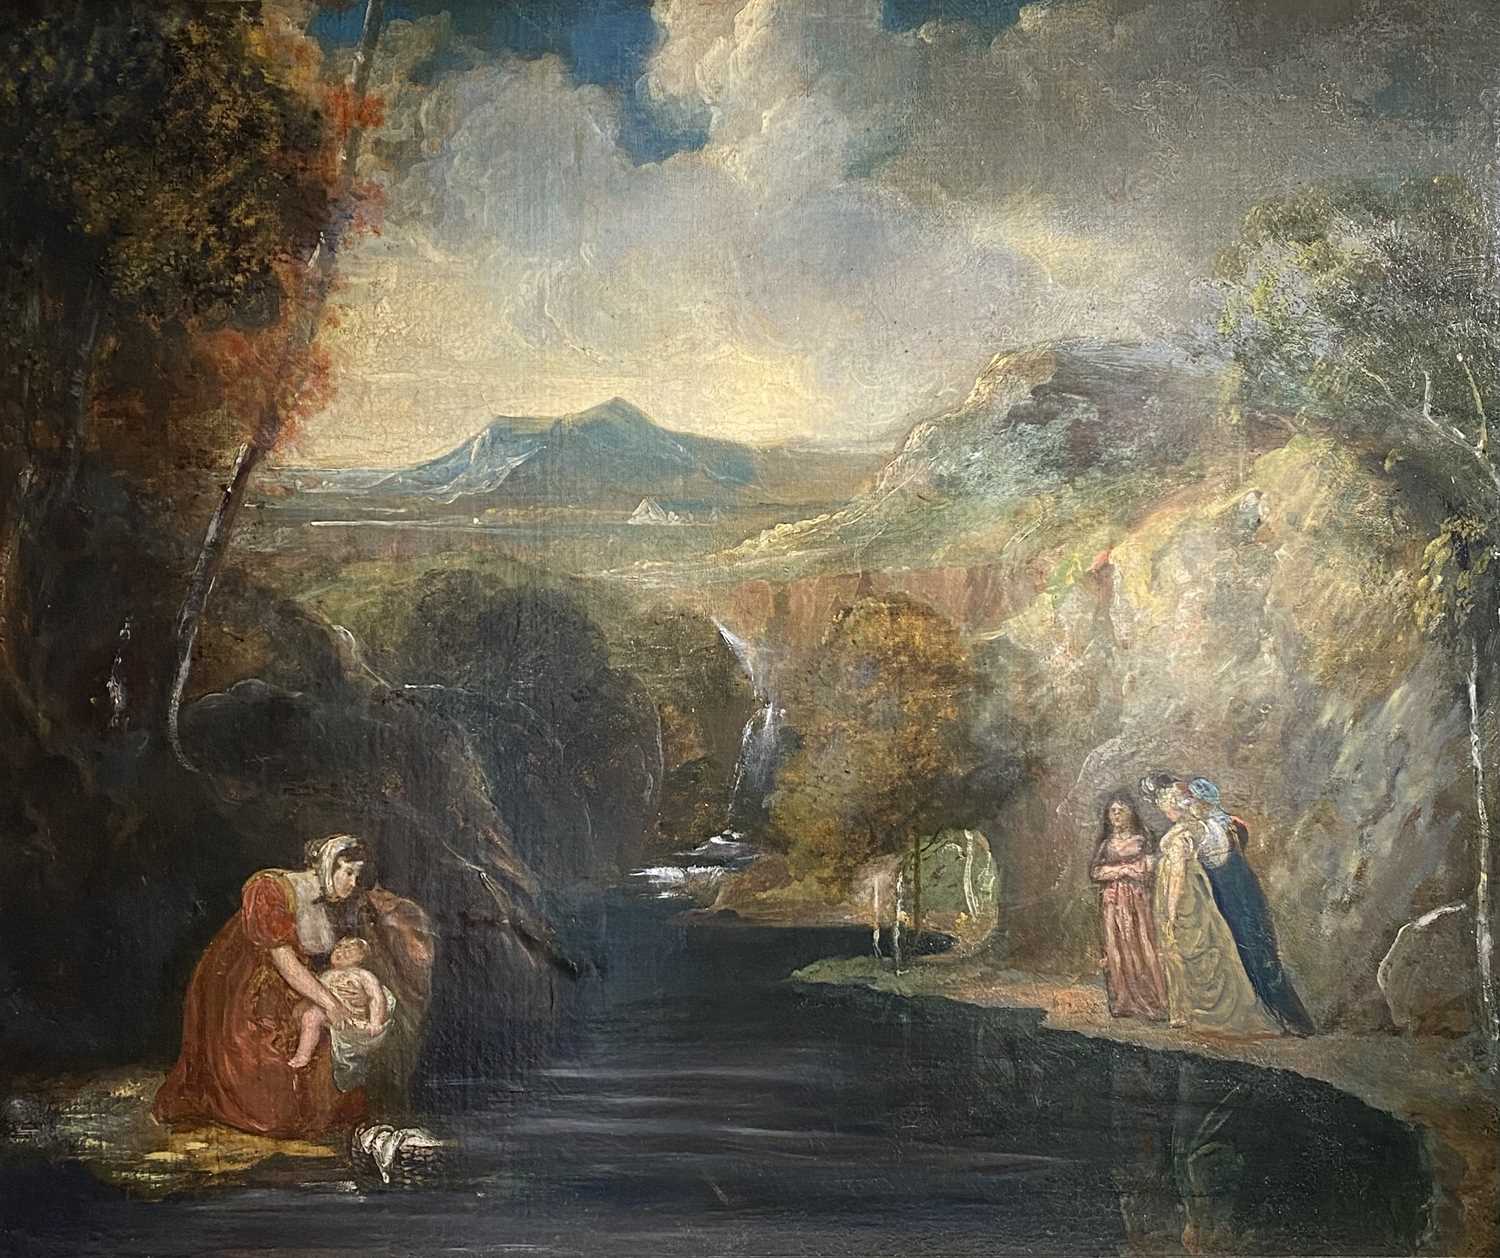 19th-Century figural group in a landscapeOil laid on canvas laid onto board62 x 75cm